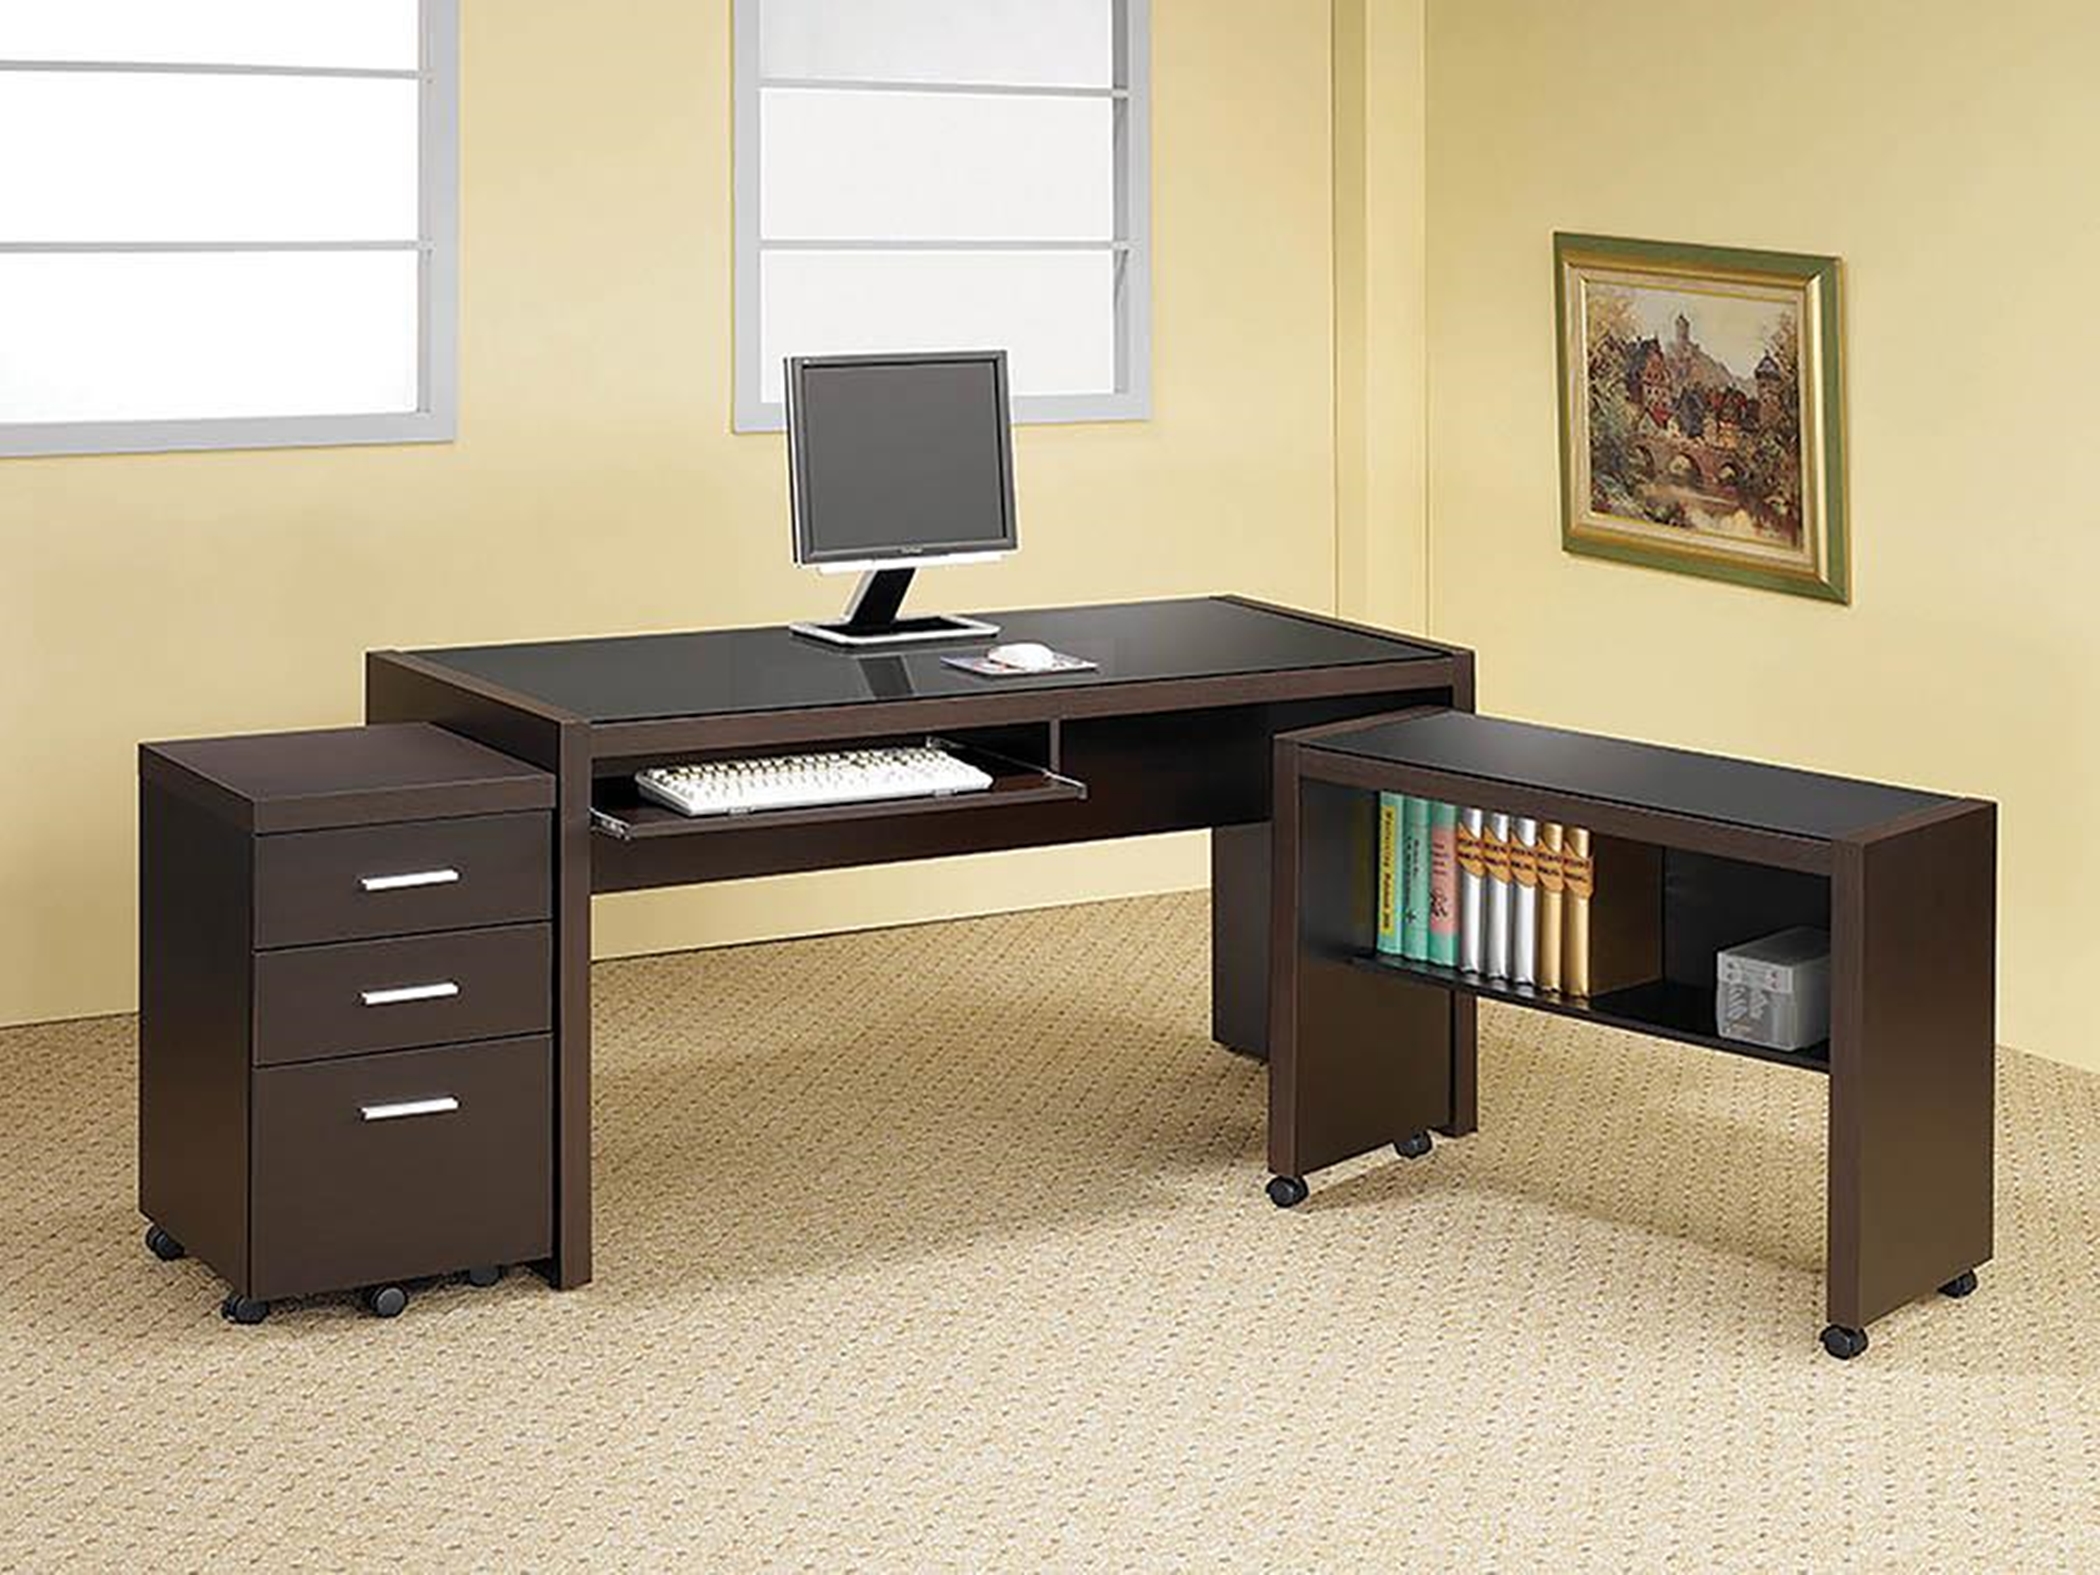 Skylar Capp. Computer Desk With Keyboard Tray - Click Image to Close